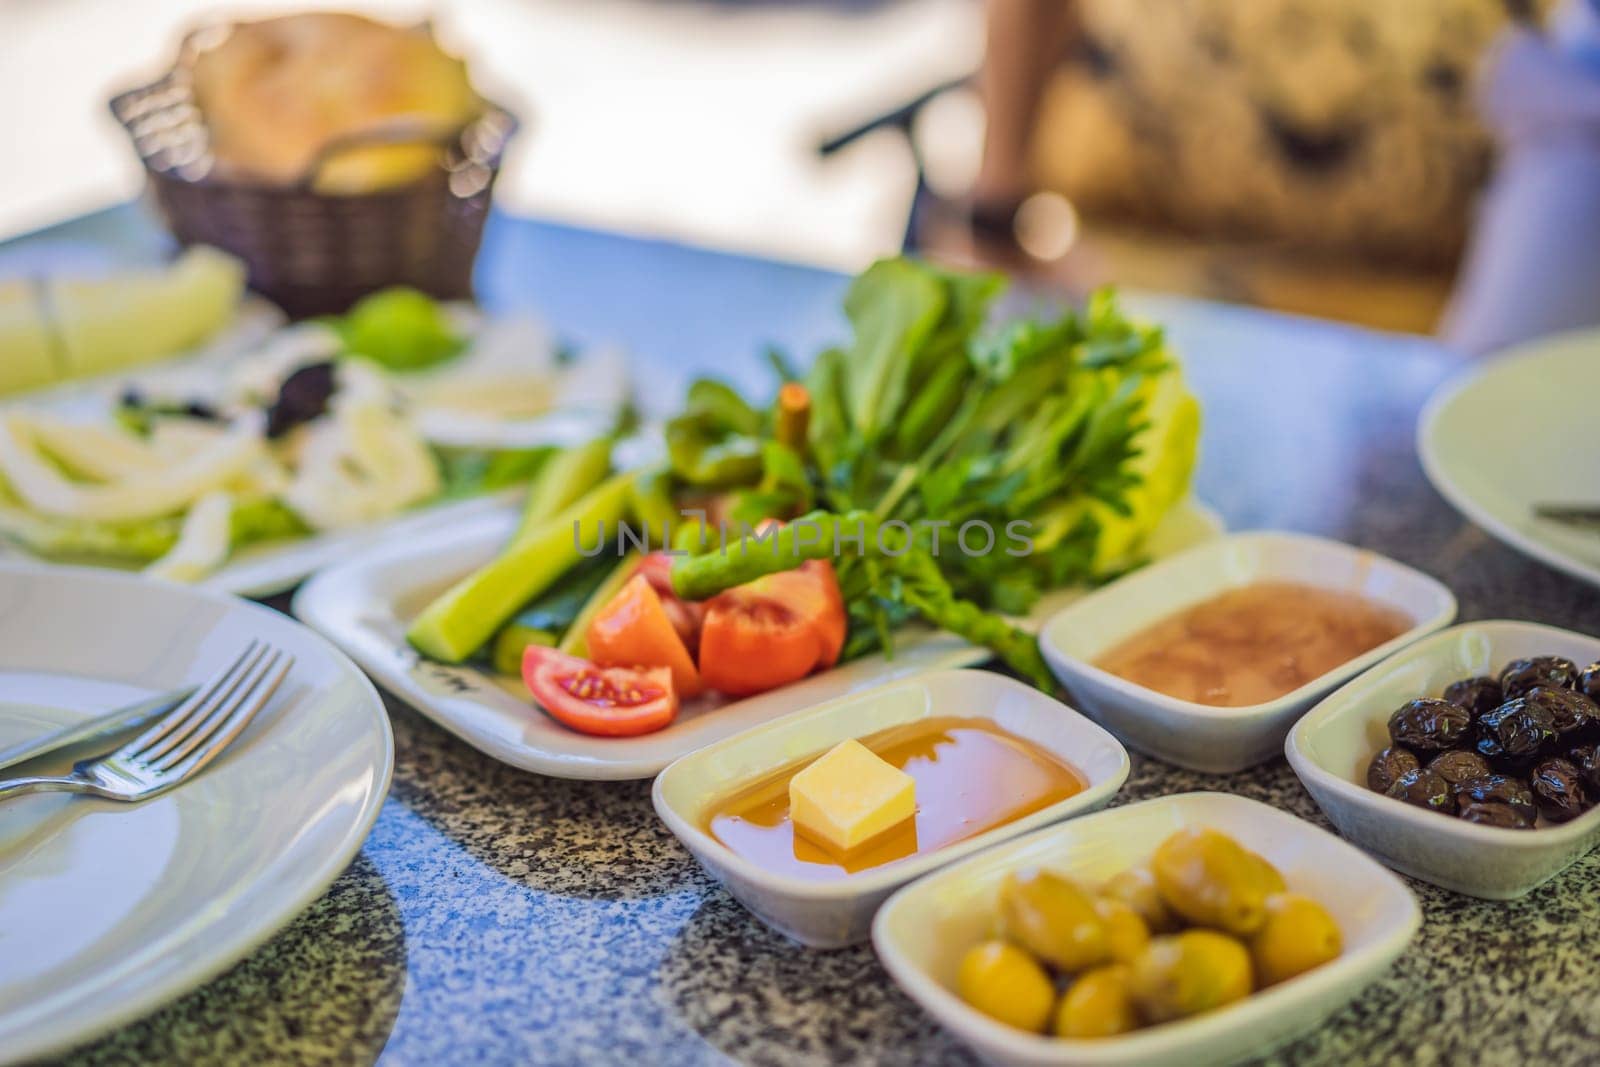 Turkish breakfast table. Pastries. Vegetables. Olives. Cheeses, fried eggs. Jams, tea in copper pot and tulip glasses. Wide composition.